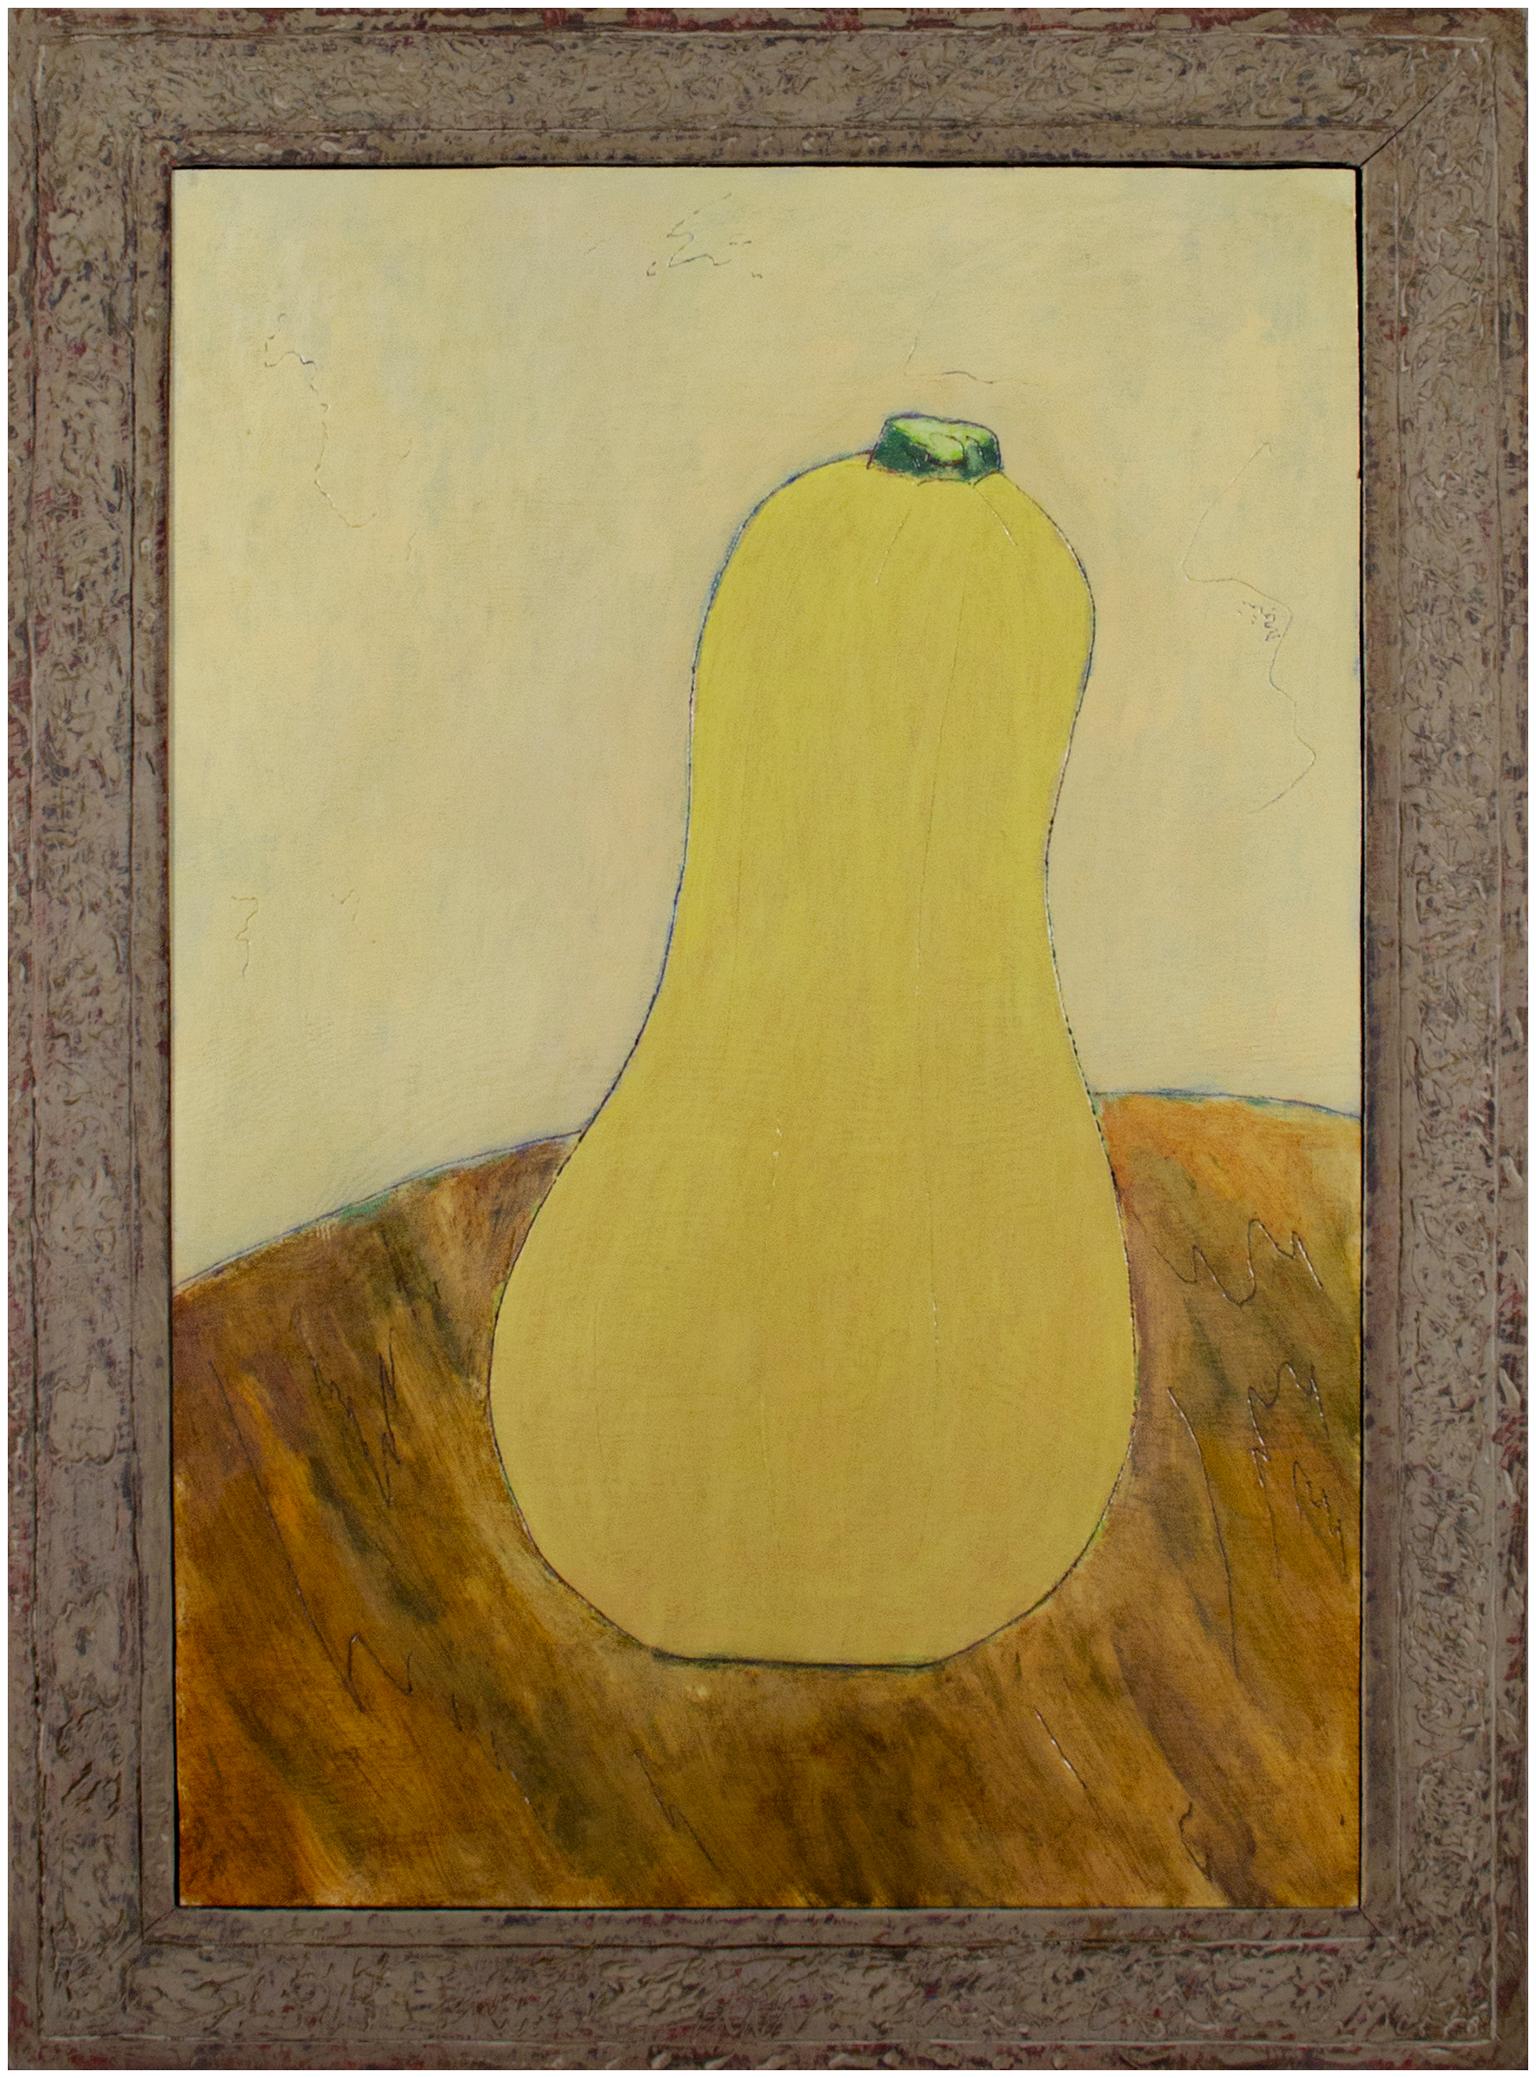 "Butter Squash" Tabletop Still-life Oil on Wood signed on back by Robert Richter